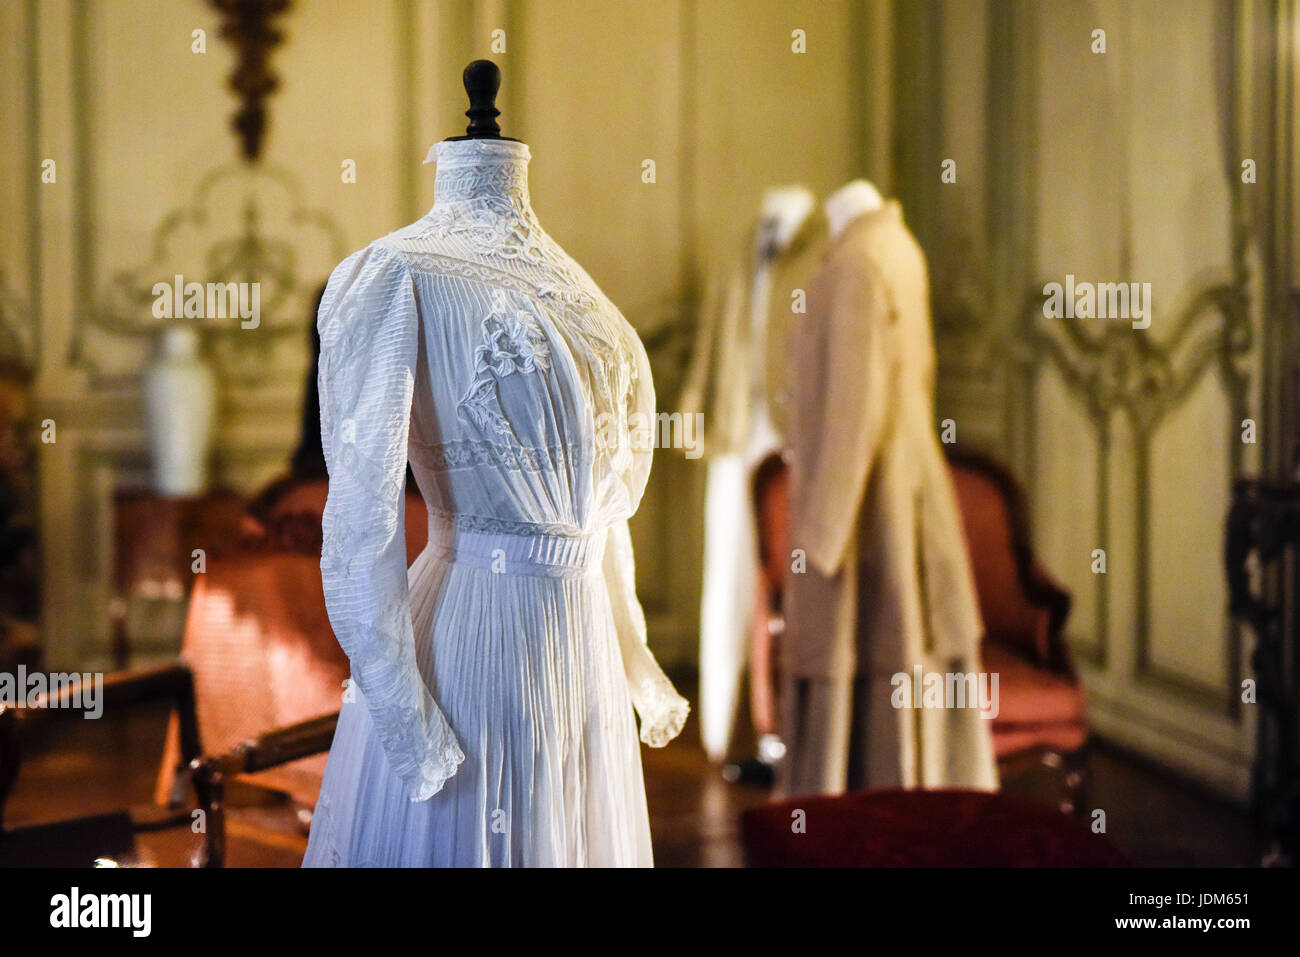 (170621) -- SEINE-ET-MARNE June 21, 2017 (Xinhua) -- Photo taken on June 20, 2017 shows a summer dress which was popular around 1900 at Chateau of Champs-sur-Marne in Marne-la-Vallee, France. The exhibition 'The History in Costumes: from the Belle Epoque to the Crazy Years 1890-1930' showed more than 40 outfits, from which visitors can realize the evolution of clothing and the social changes at that time. (Xinhua/Chen Yichen)(zf) Stock Photo